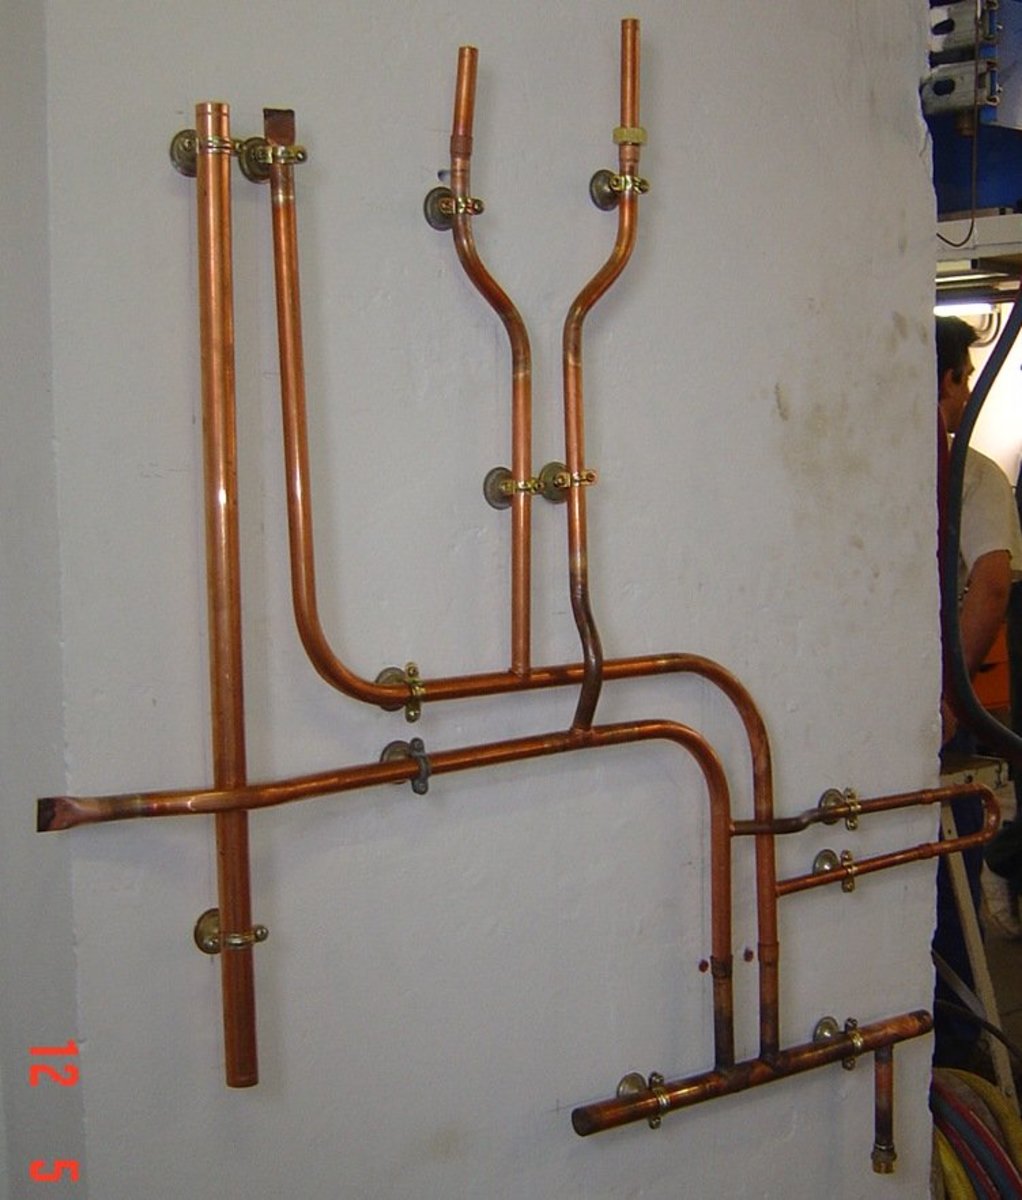 How to Bend a Copper Pipe With and Without Plumbing Tools